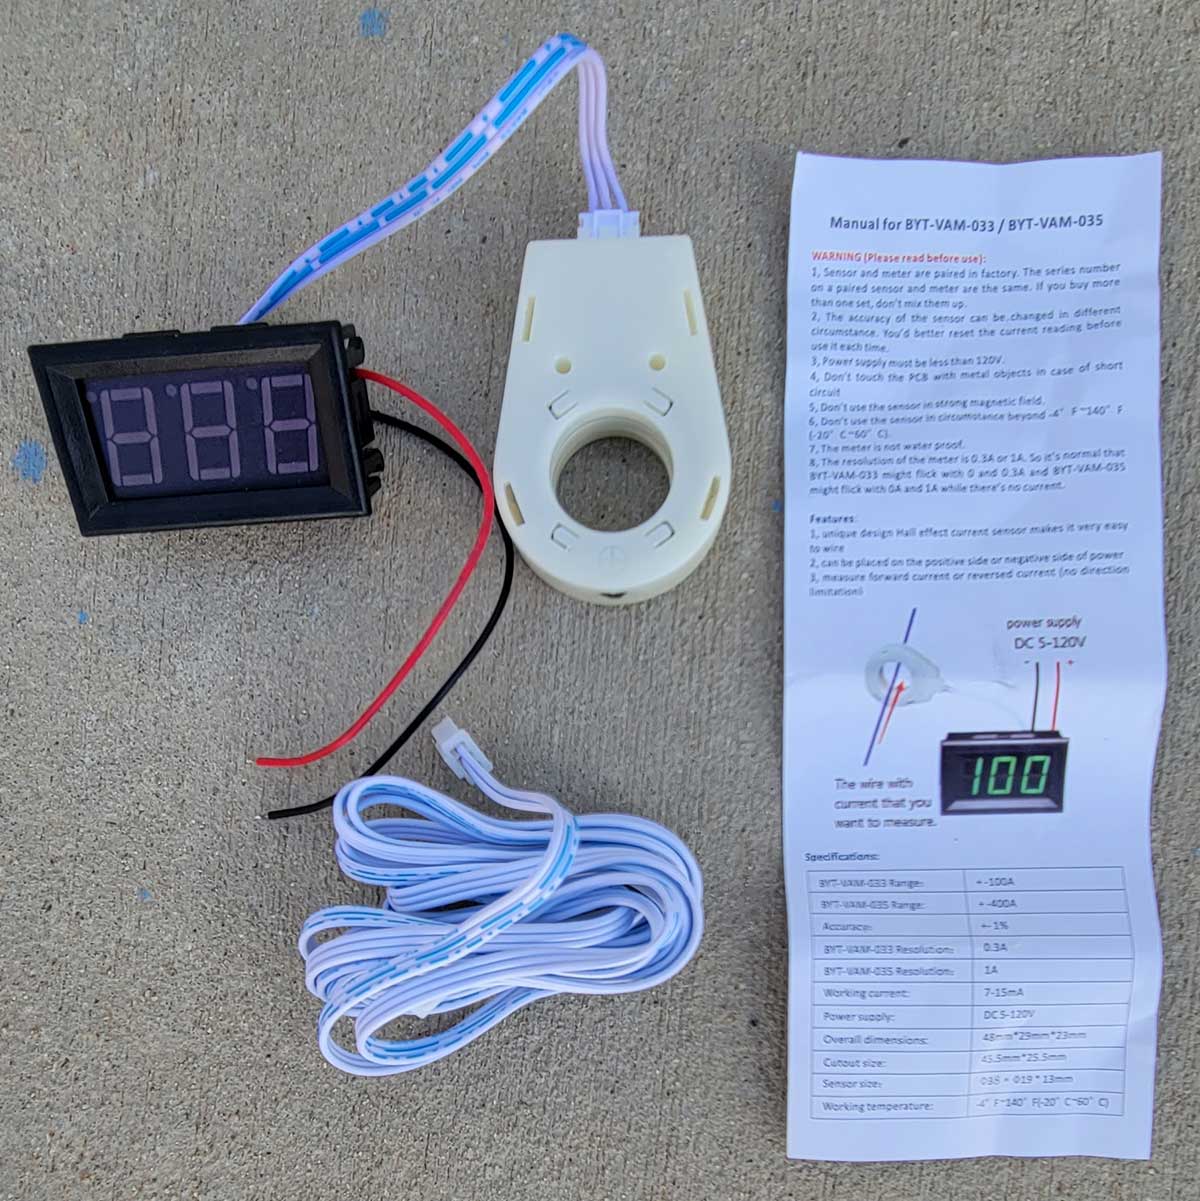 The Baylite meter kit laid out